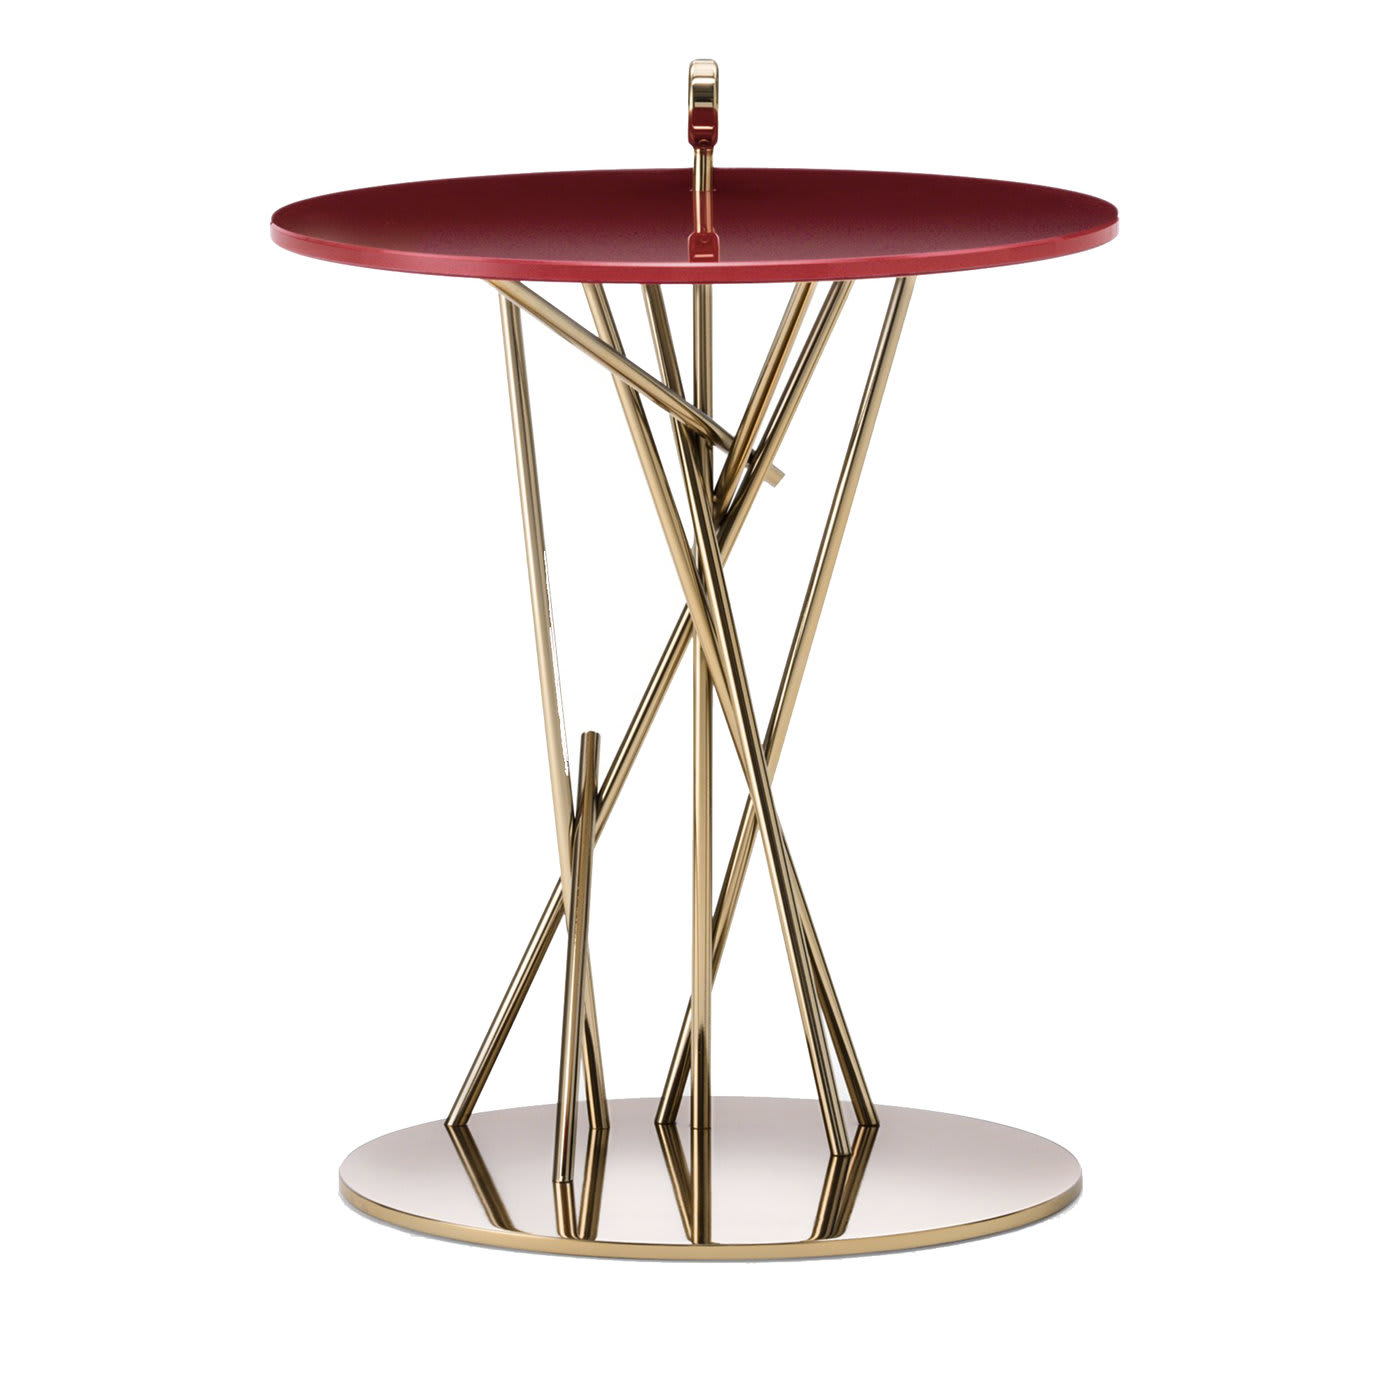 Tao Side Table by Claudia Campone and Martina Stancati - Black Tie